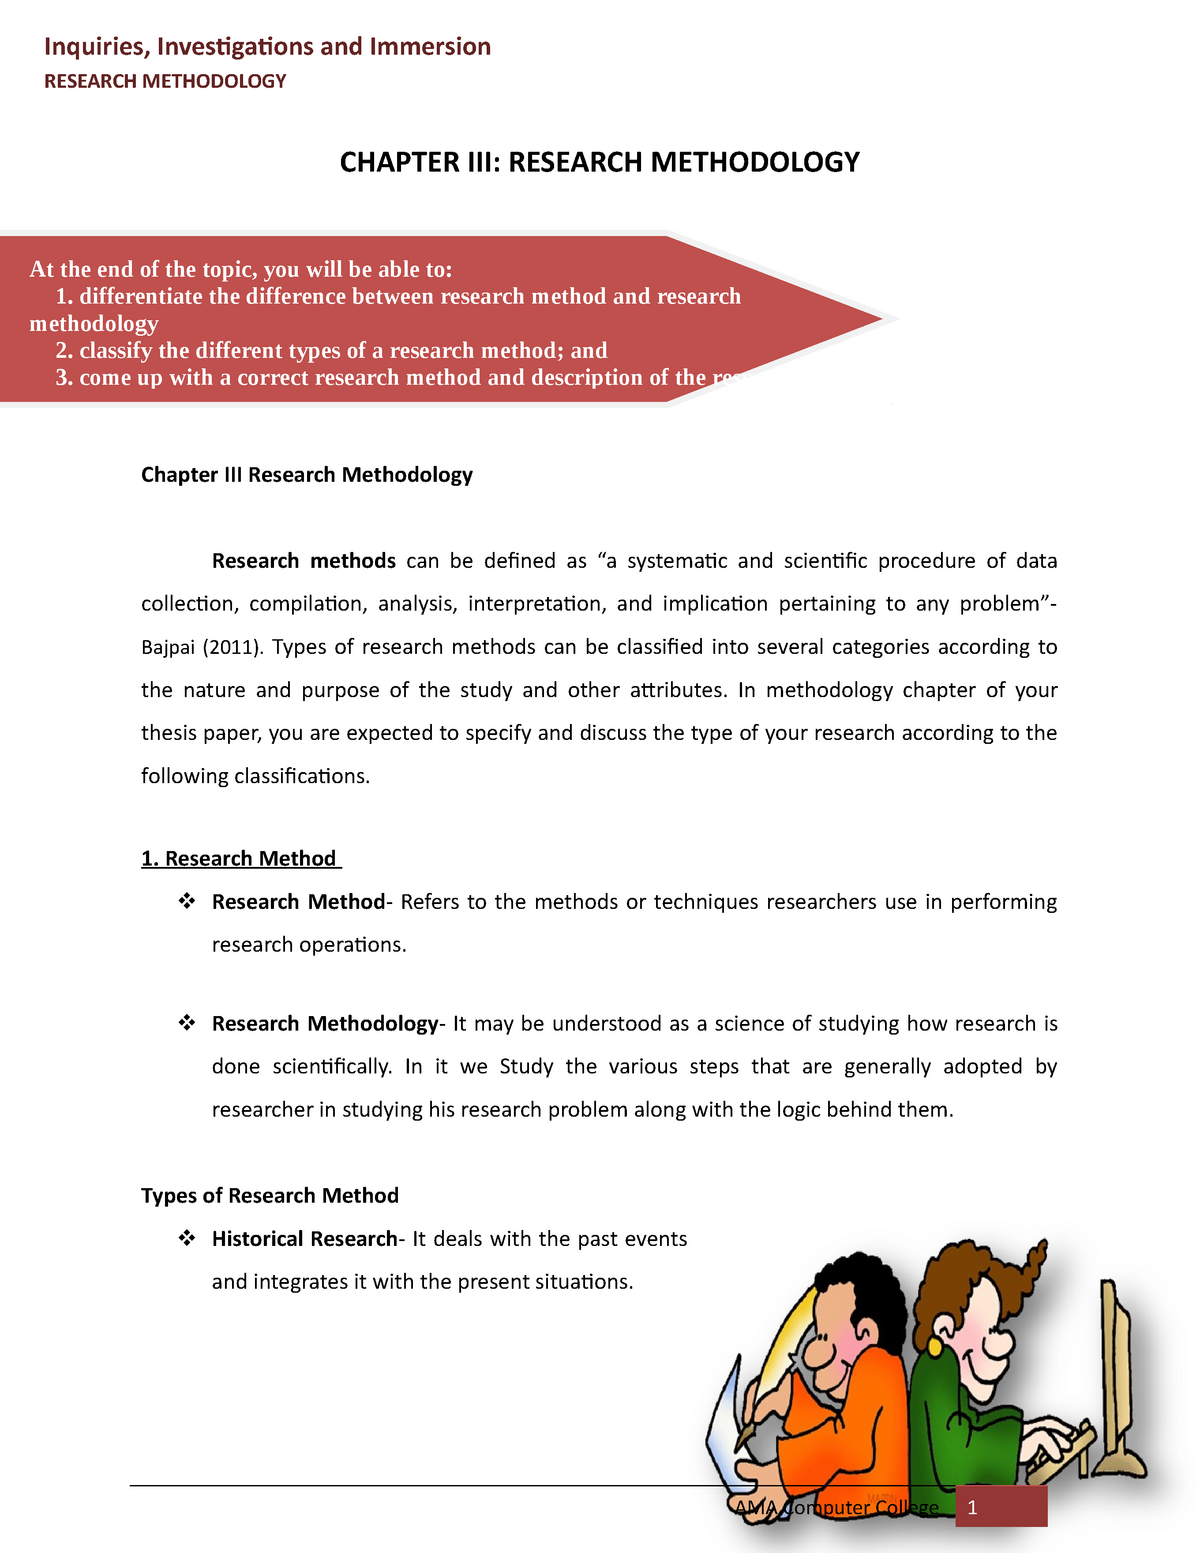 example of research methodology chapter 3